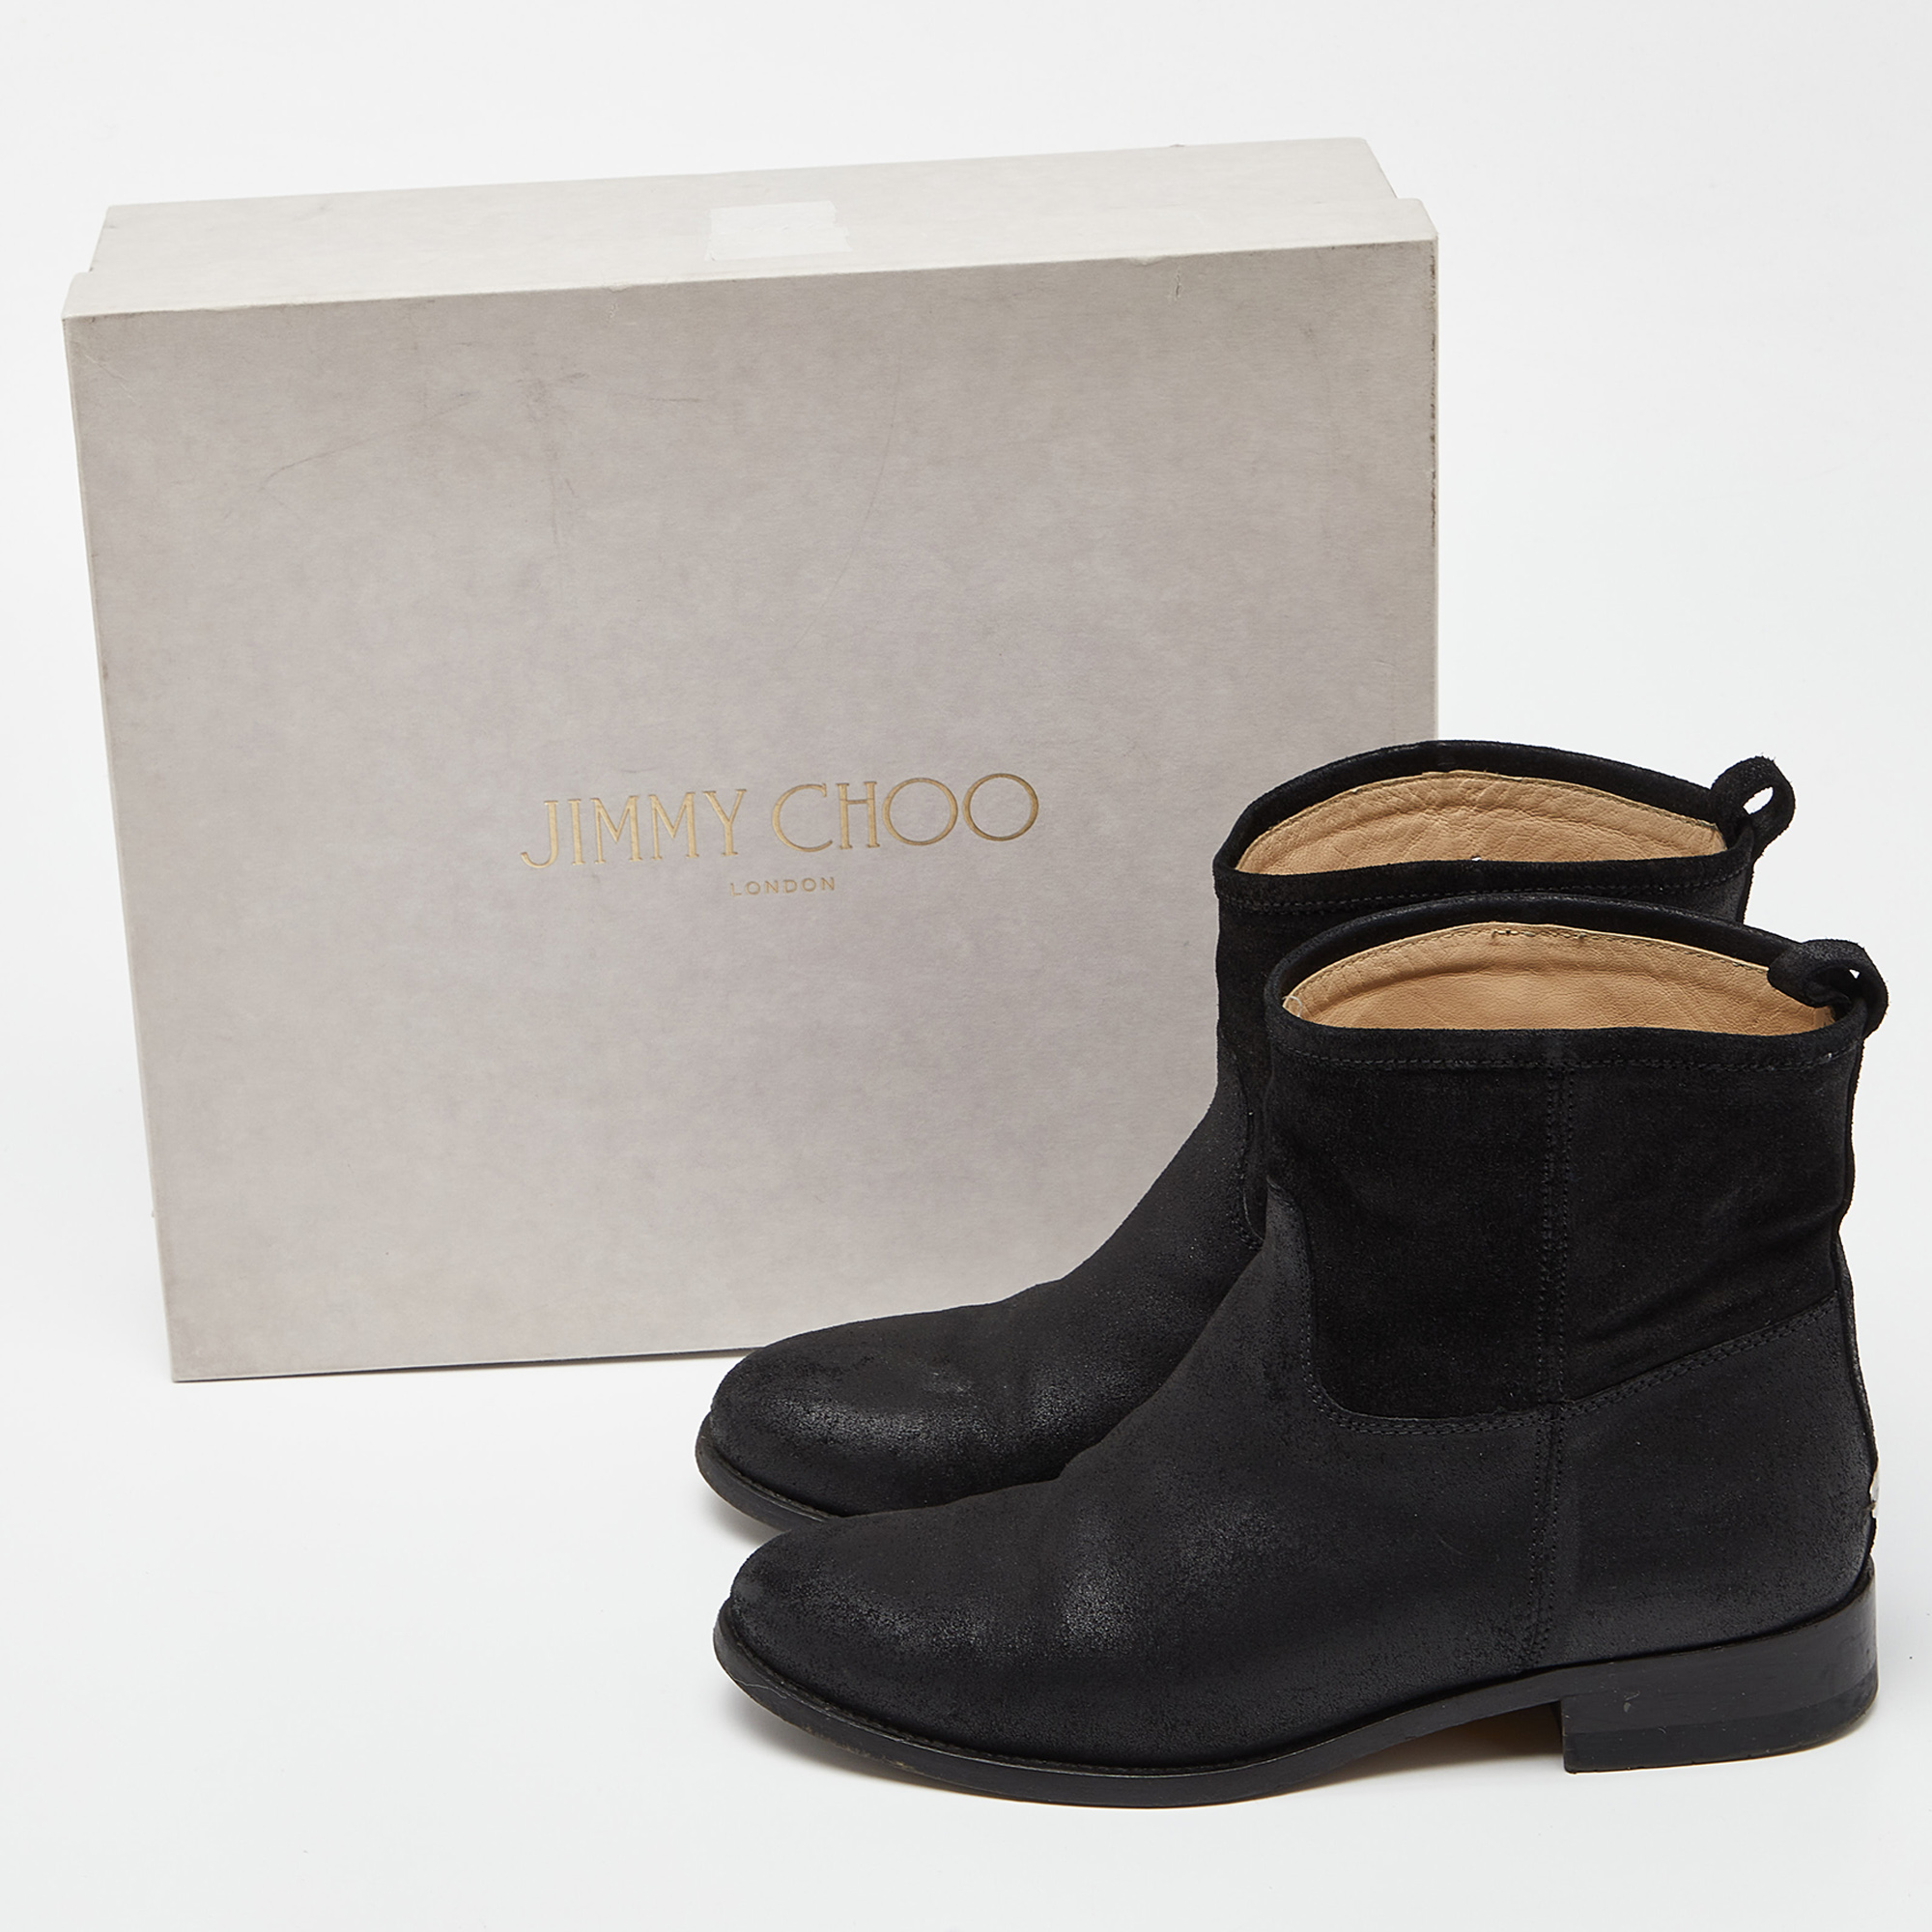 Jimmy Choo Black Rugged Suede Harley Ankle Boots Size 37